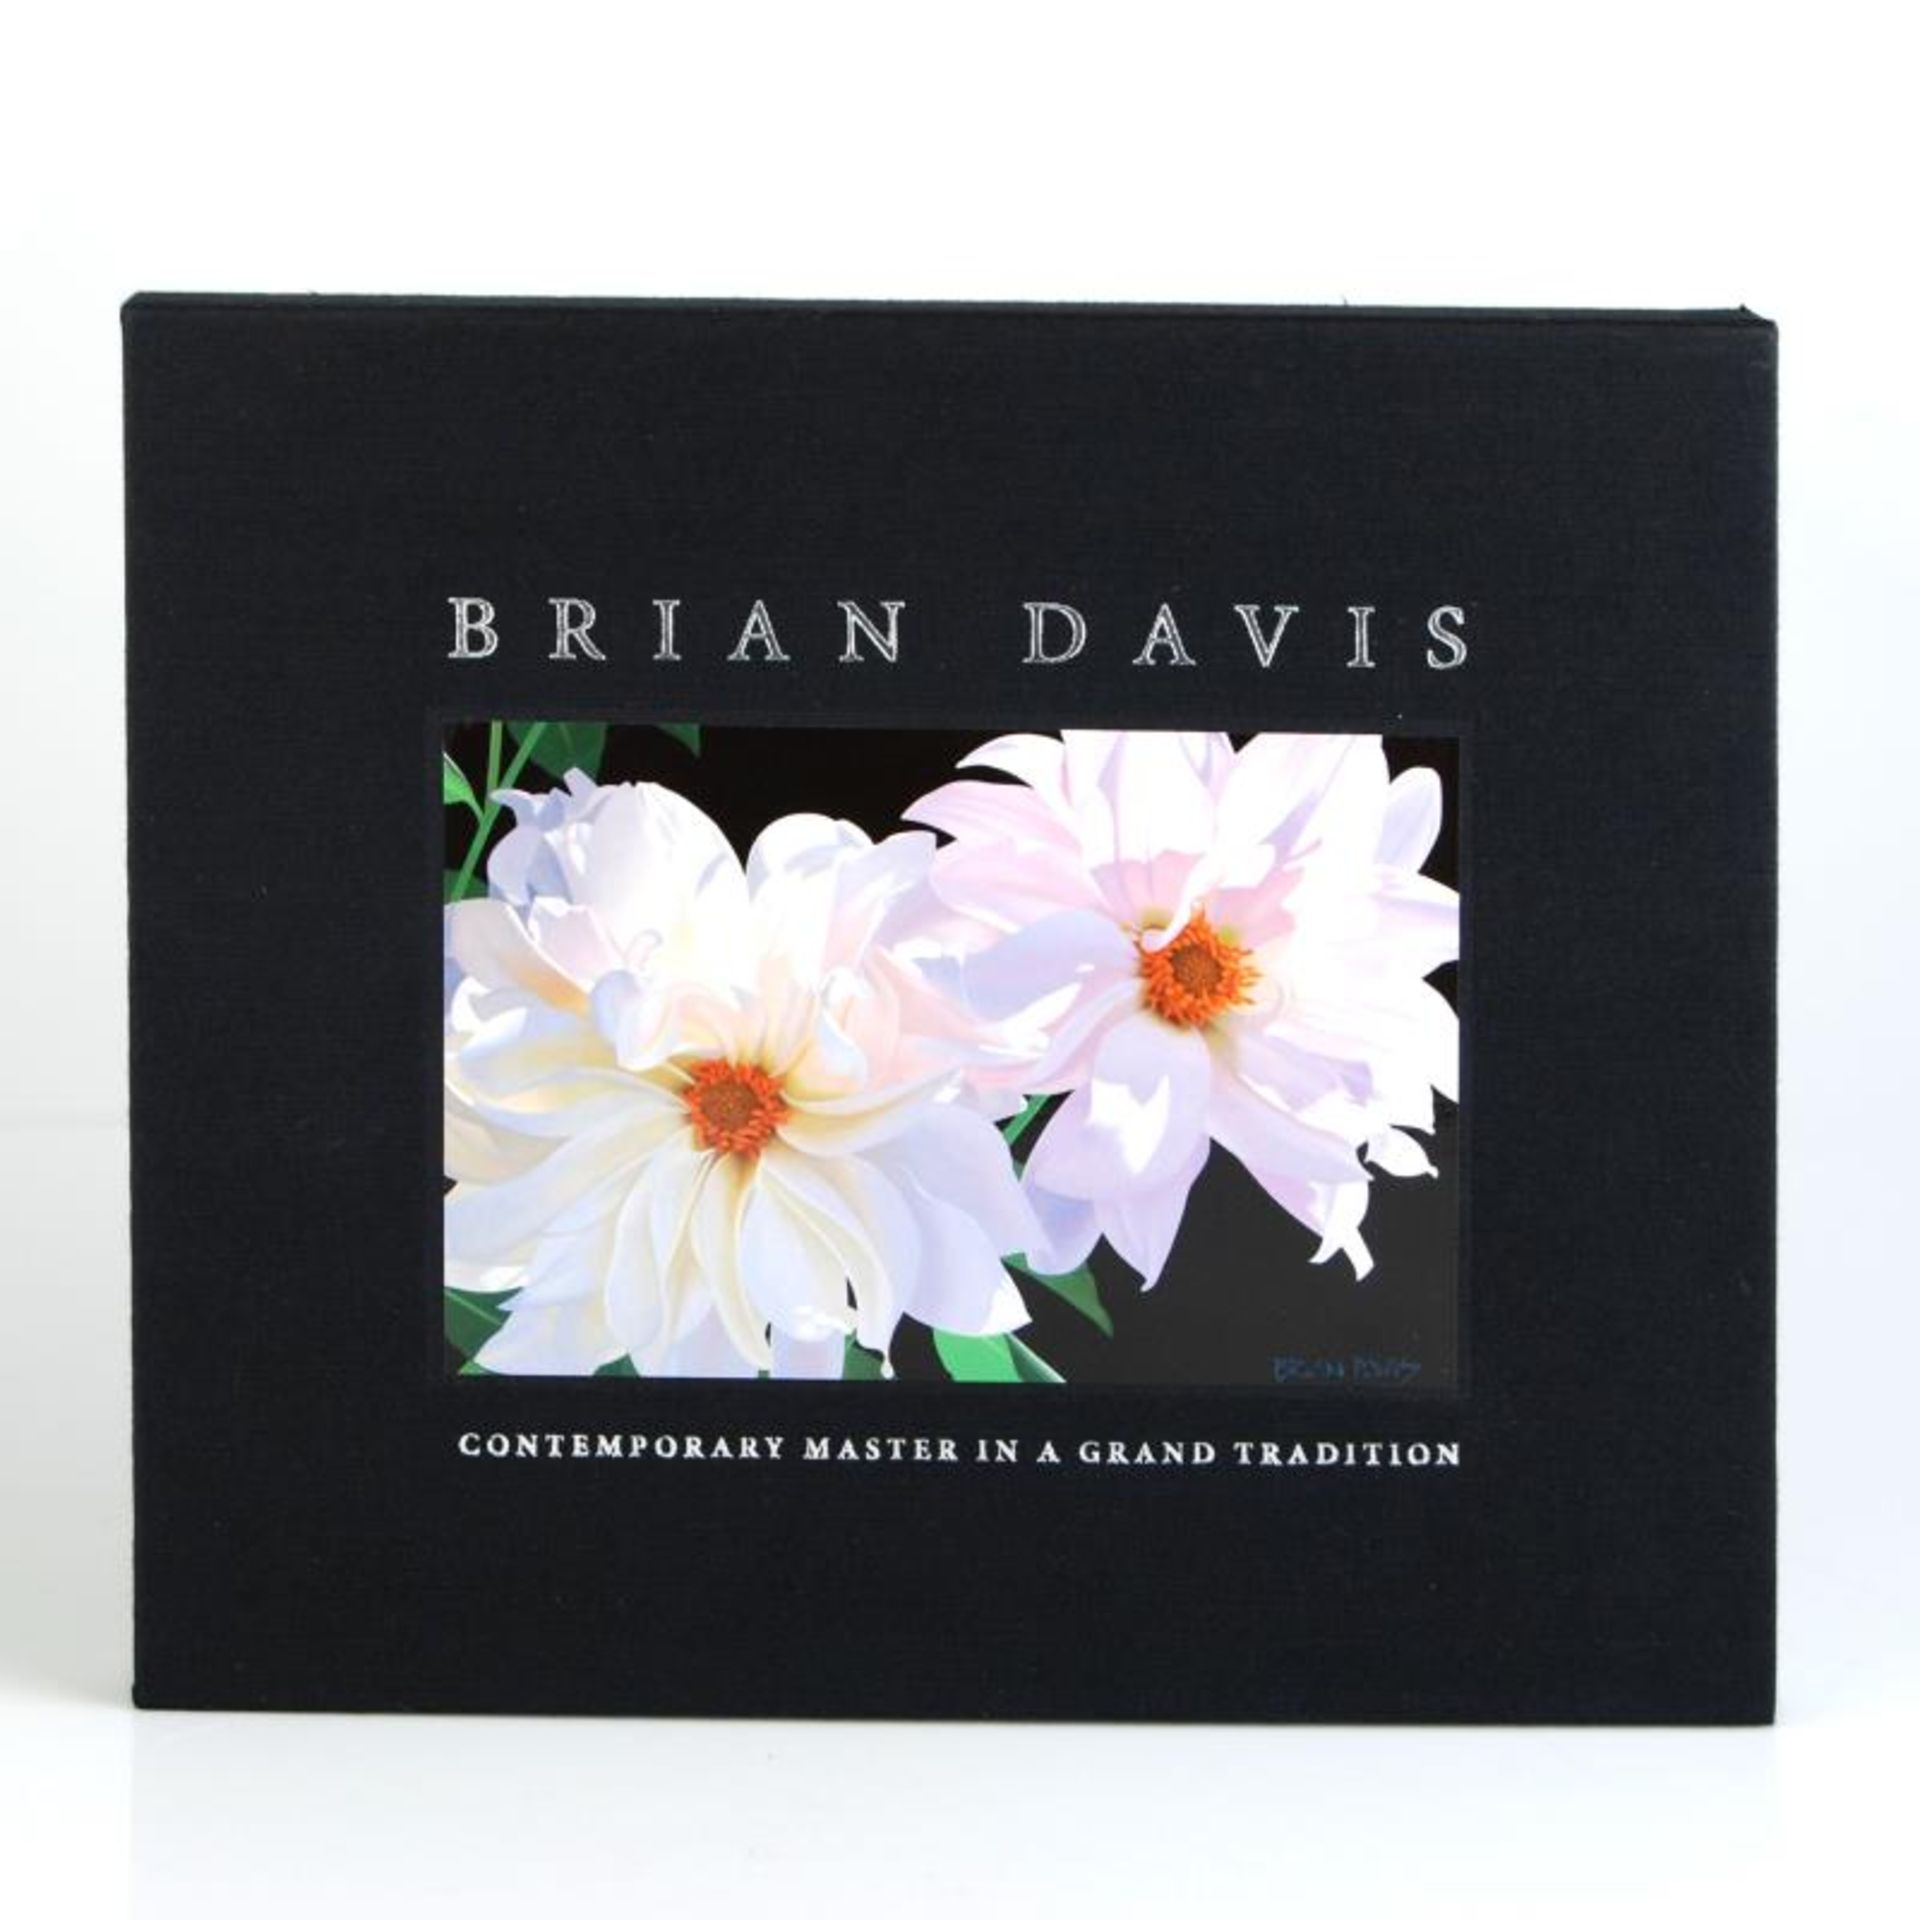 Brian Davis, "Contemporary Master in a Grand Tradition (Deluxe)" Limited Edition - Image 2 of 3